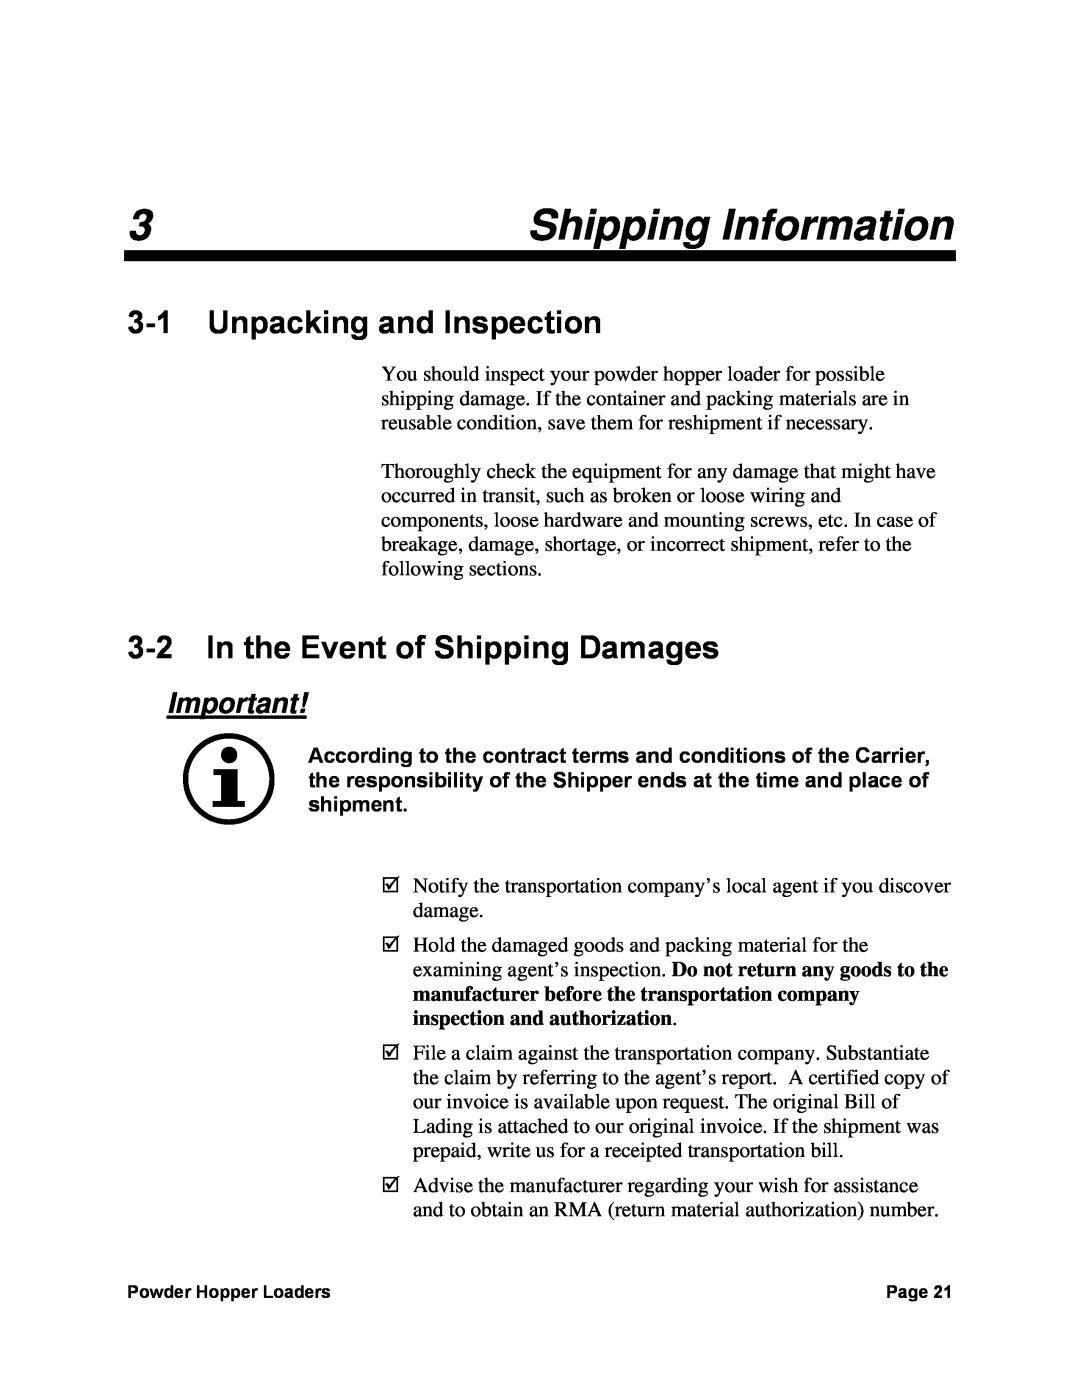 Sterling 882, 0, 238 manual Shipping Information, Unpacking and Inspection, In the Event of Shipping Damages 